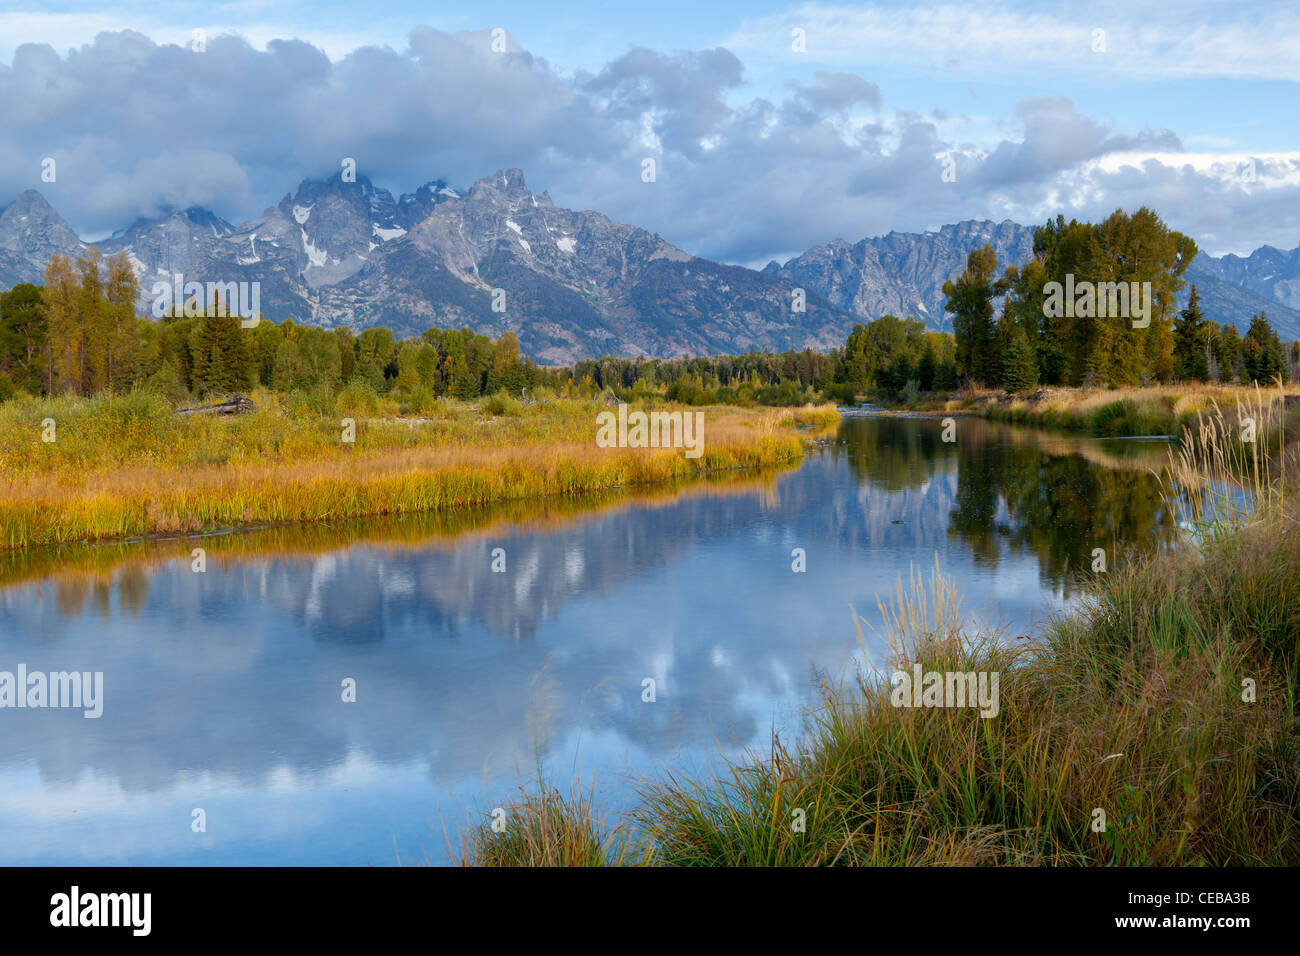 Schwabachers Landing is a boat landing giving access to the Snake River inside Grand Teton National Park.  It is one of only four places within the park with easy access to the river. Stock Photo